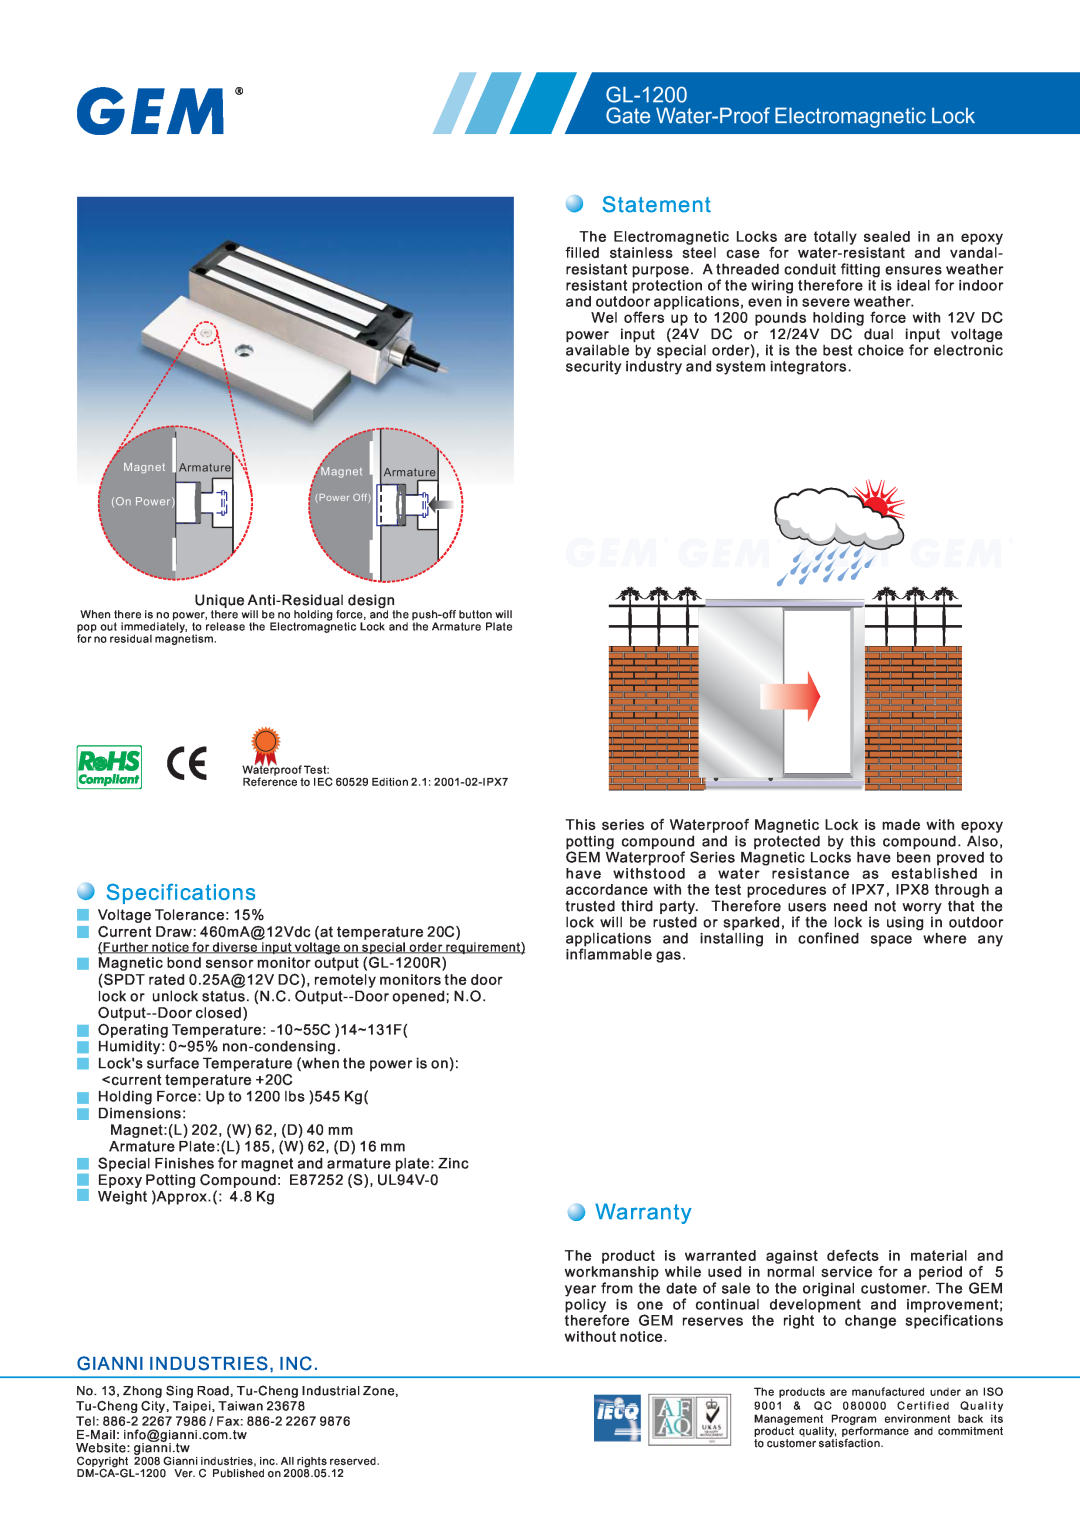 Gianni Industries specifications GL-1200 Gate Water-Proof Electromagnetic Lock, Gianni Industries, Inc, Statement 